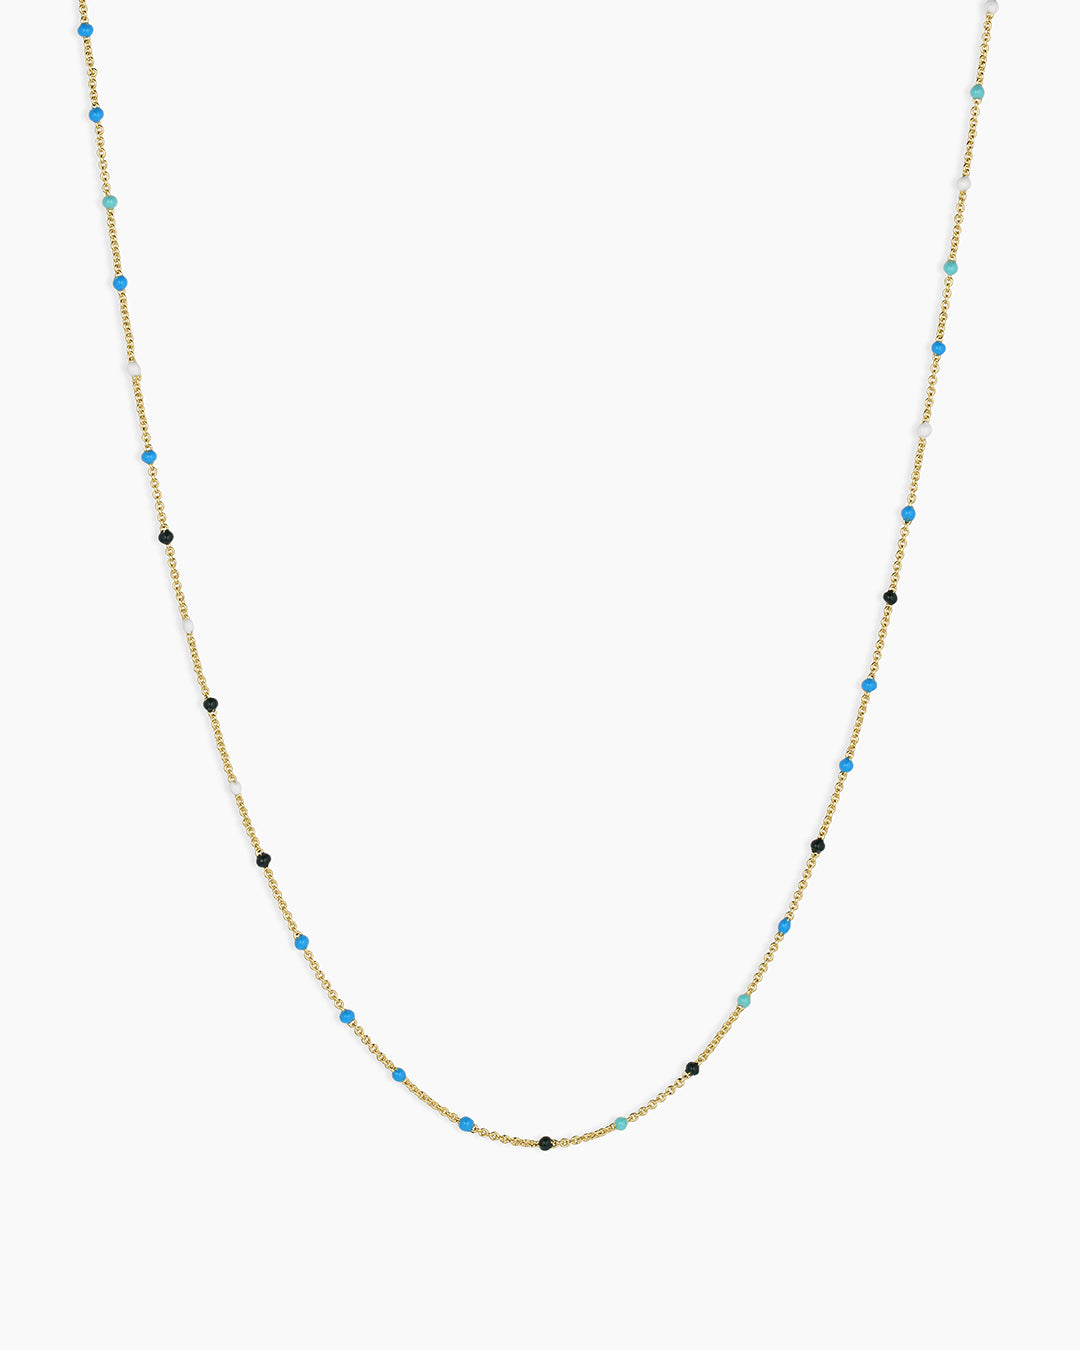 gold necklace with blue beads